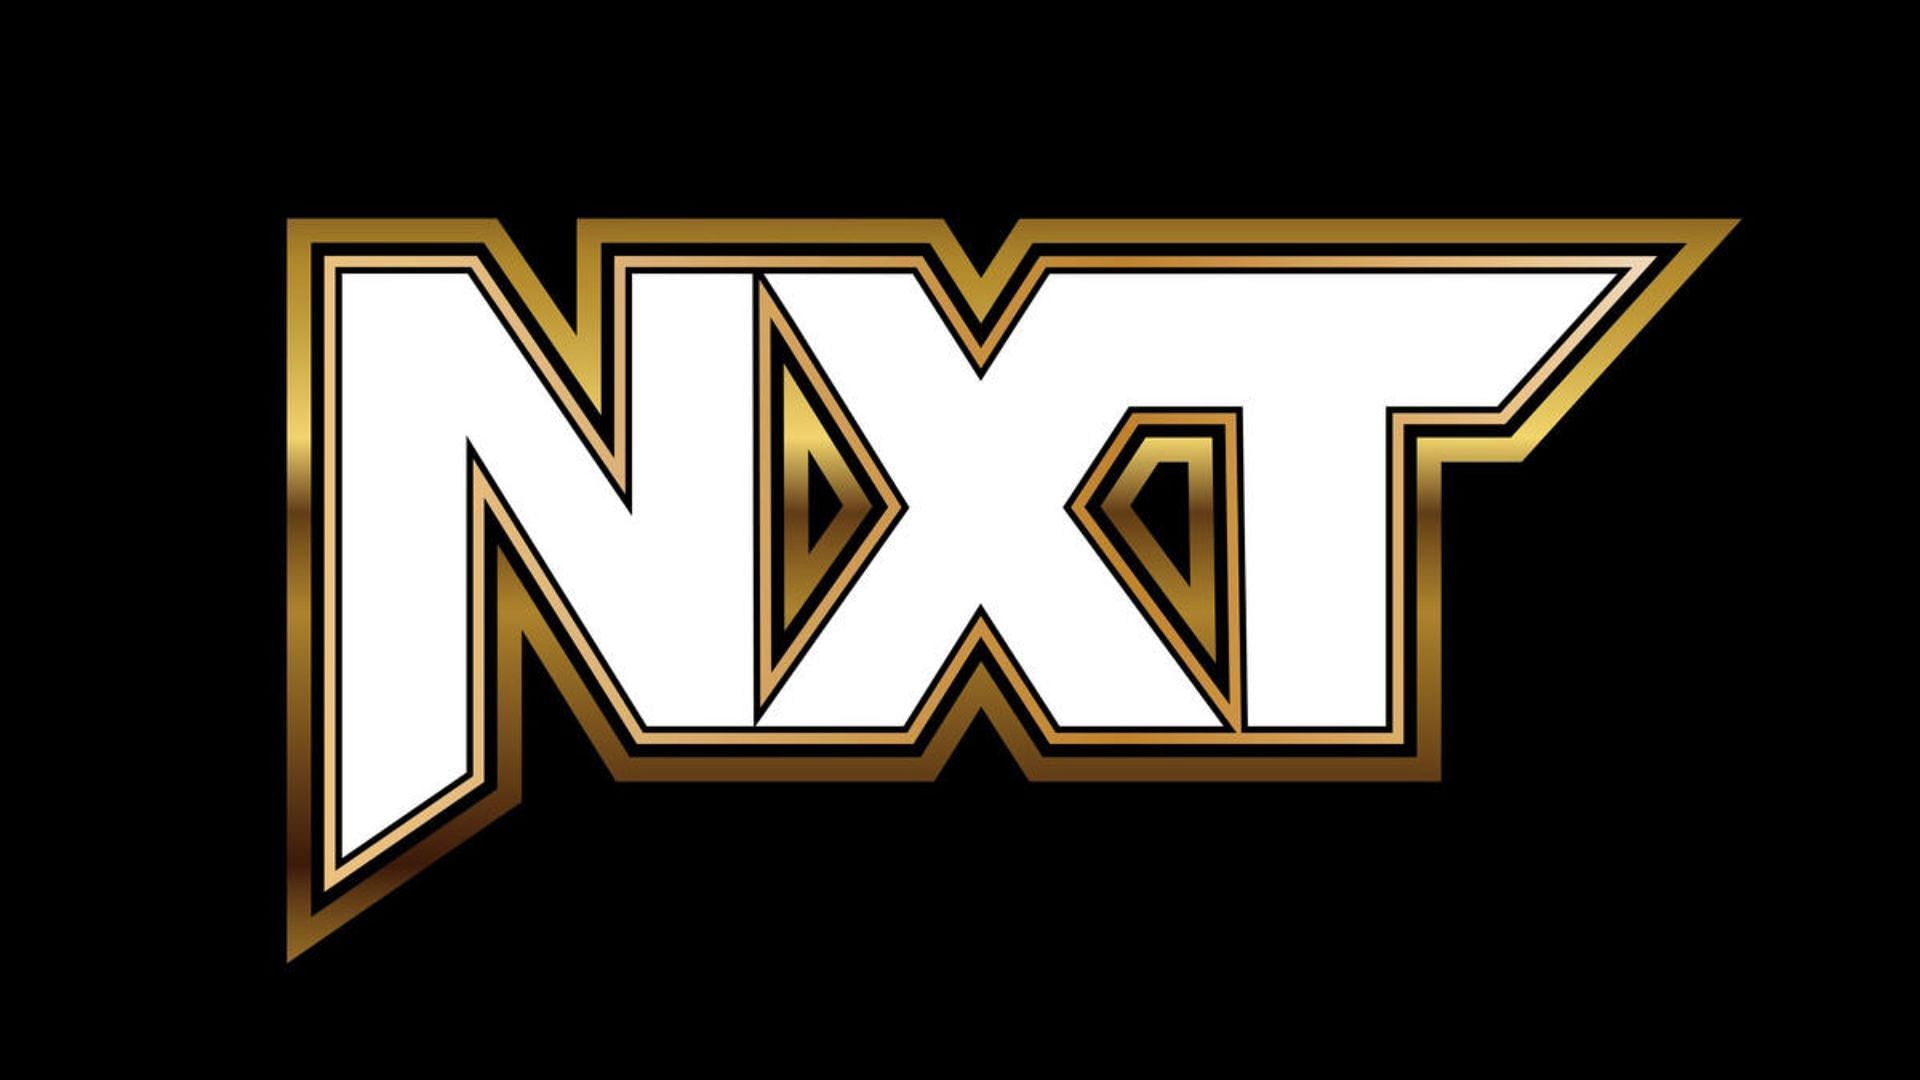 NXT has been home to several talented WWE superstars